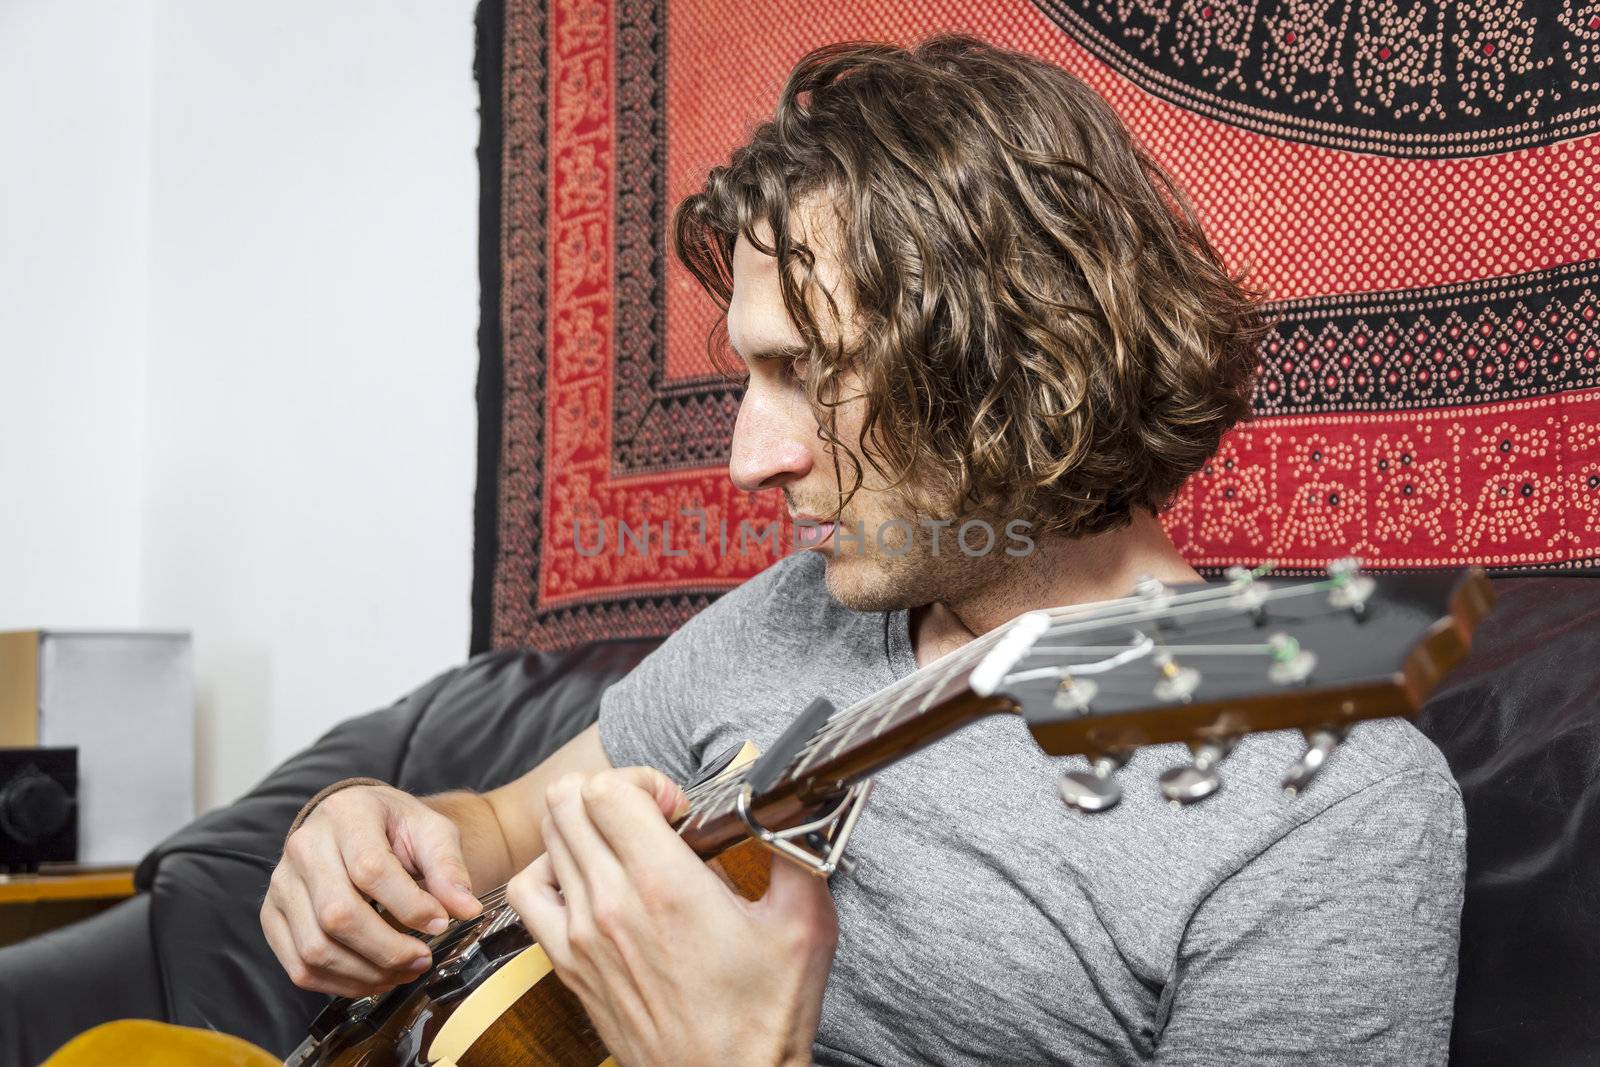 An image of a handsome guitar player with a curly hairdo